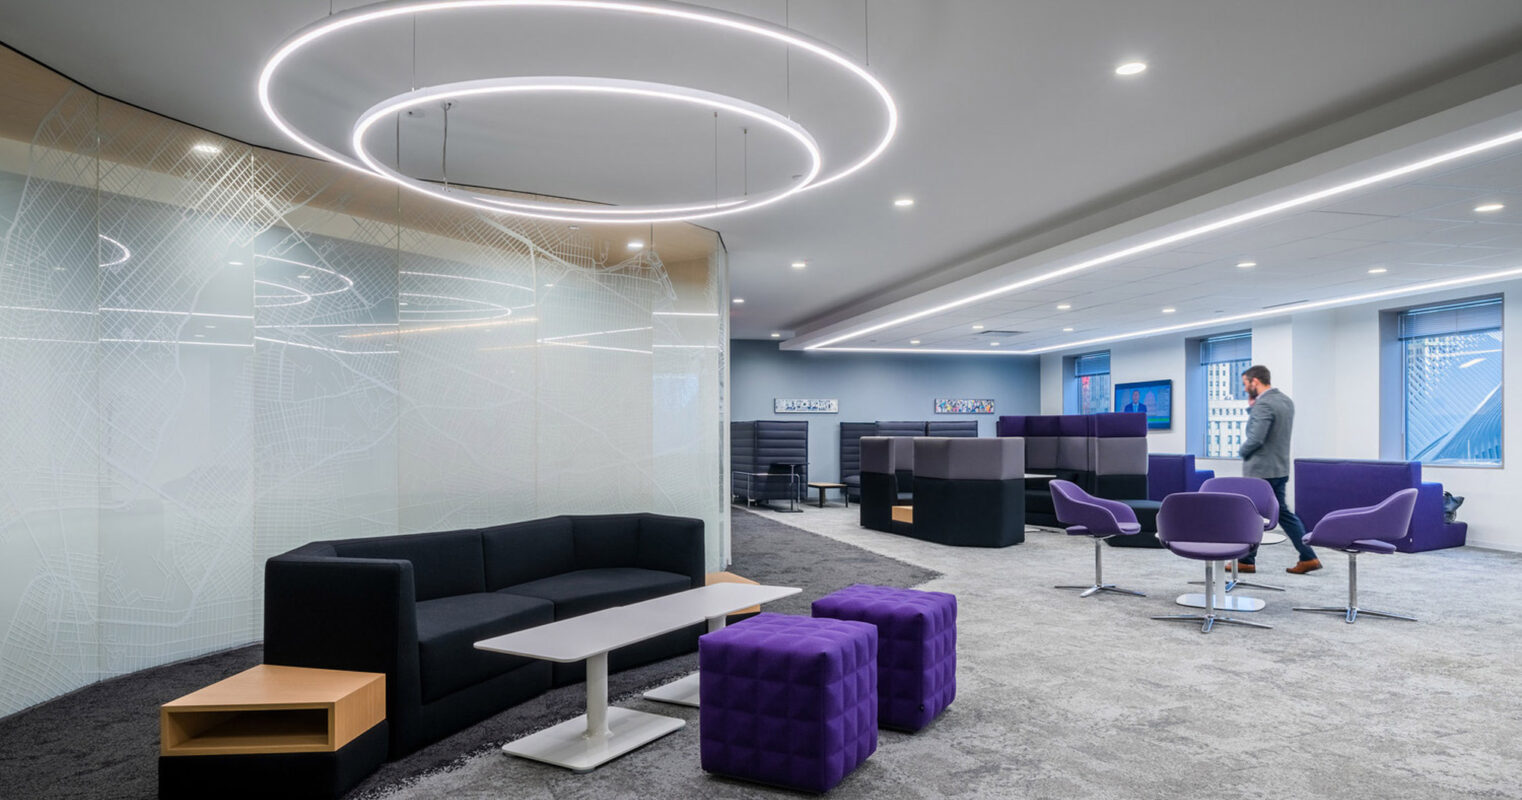 Modern office lounge featuring a sleek black sofa, plum-colored armchairs, and vibrant purple ottomans beneath an oversized circular light fixture. The setting is accentuated by geometric patterns adorning glass partitions, with a gentleman in business attire observing the city view.